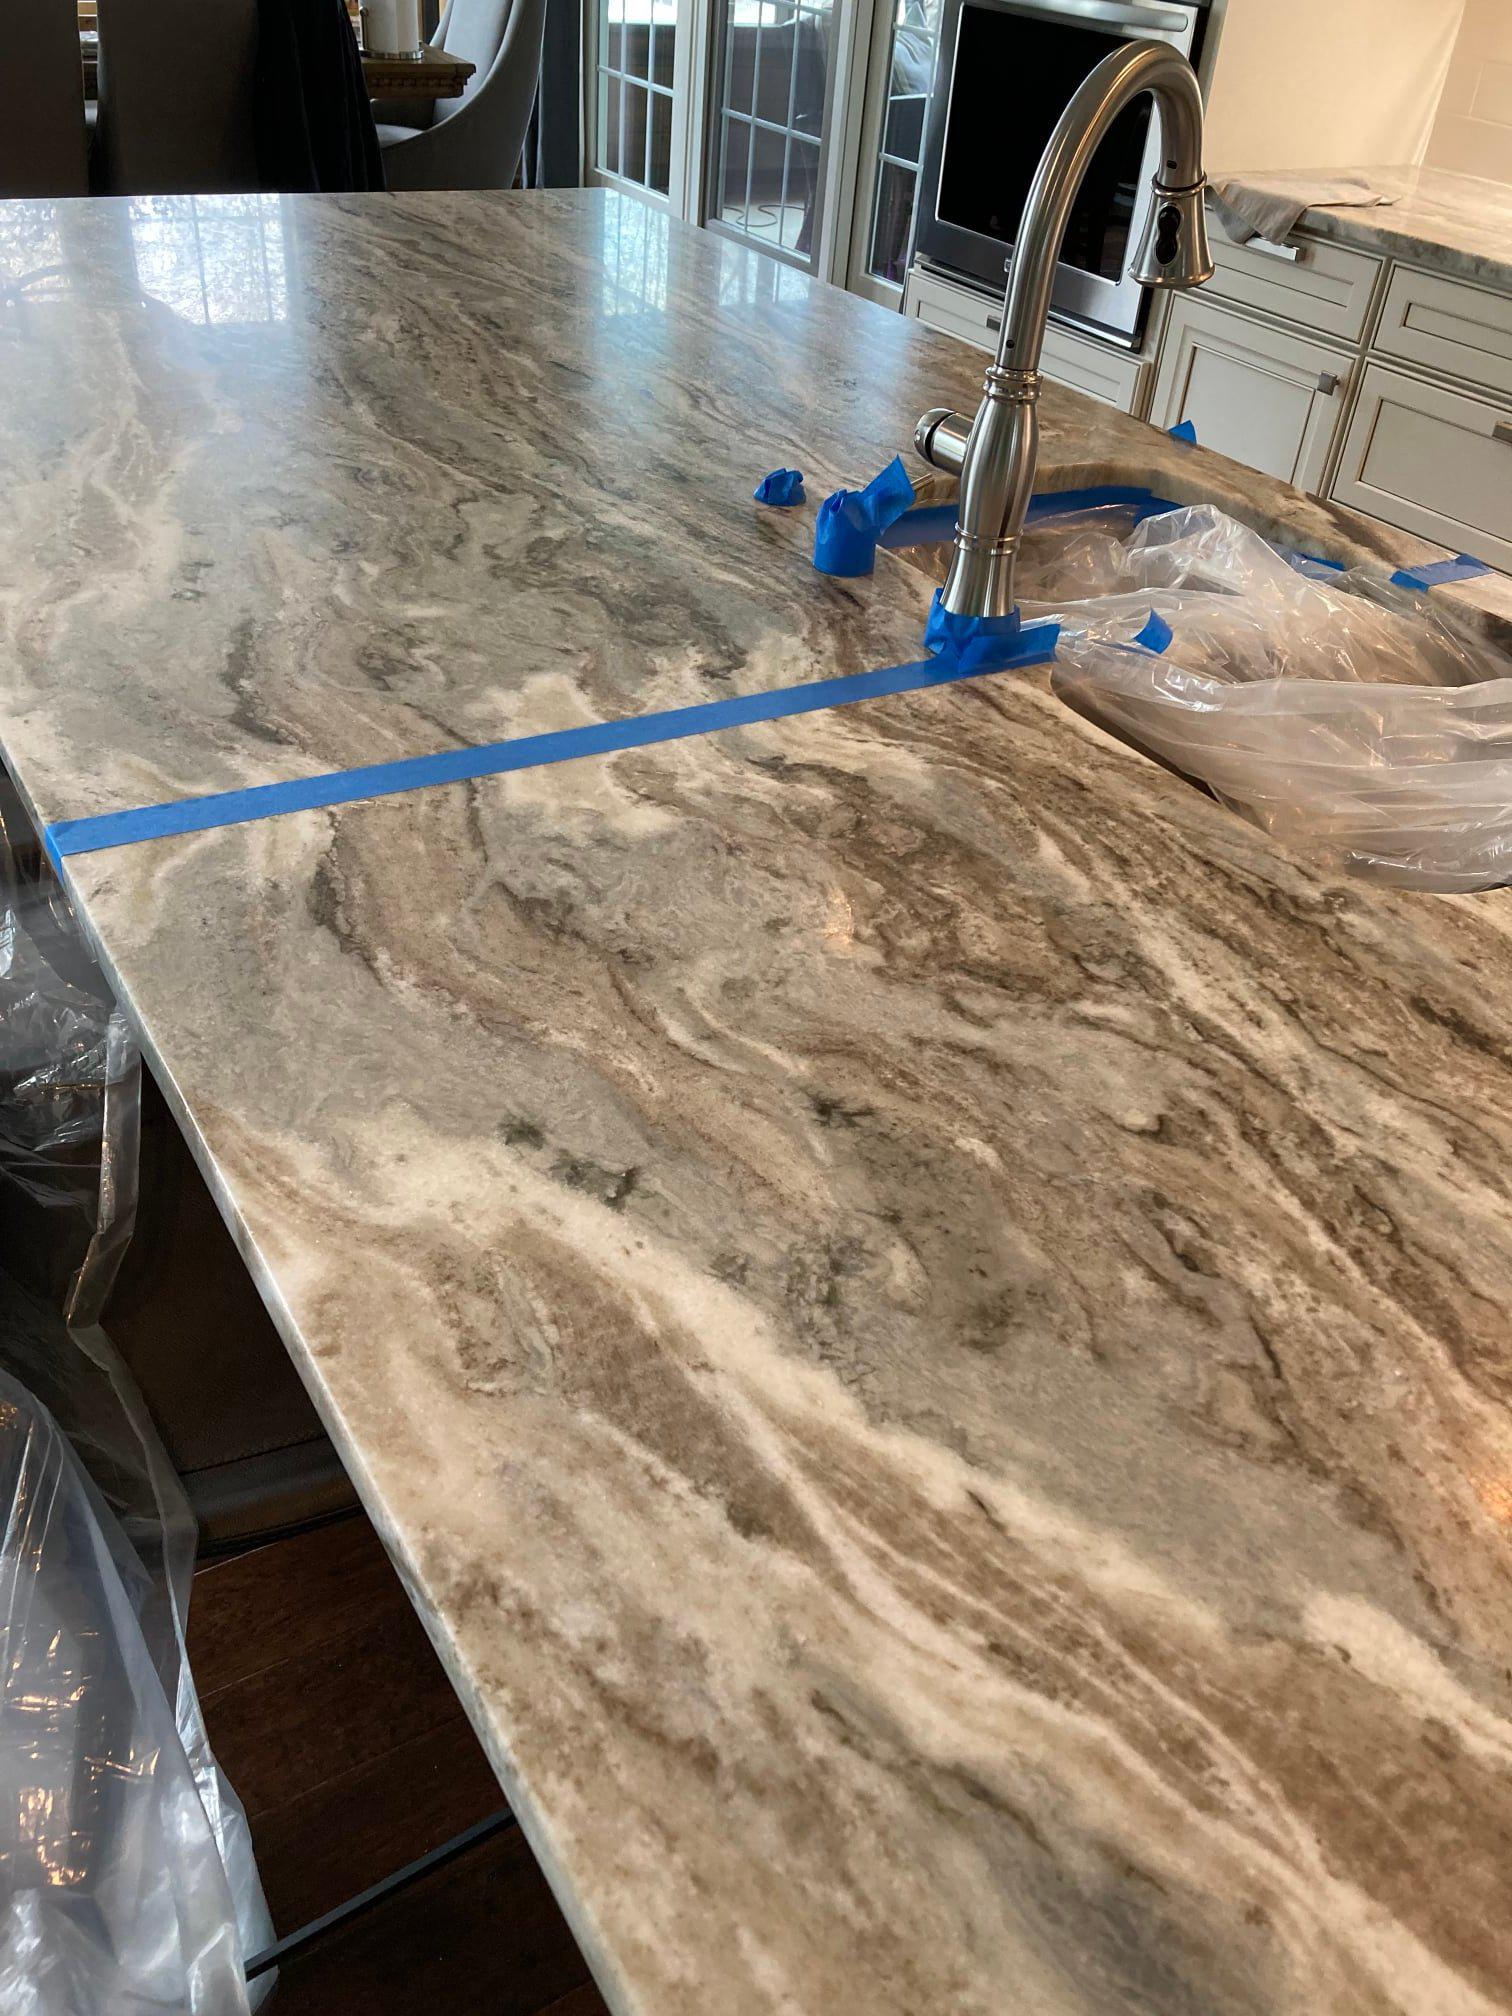 countertop cleaning White River Chem-Dry Muncie (765)217-4337